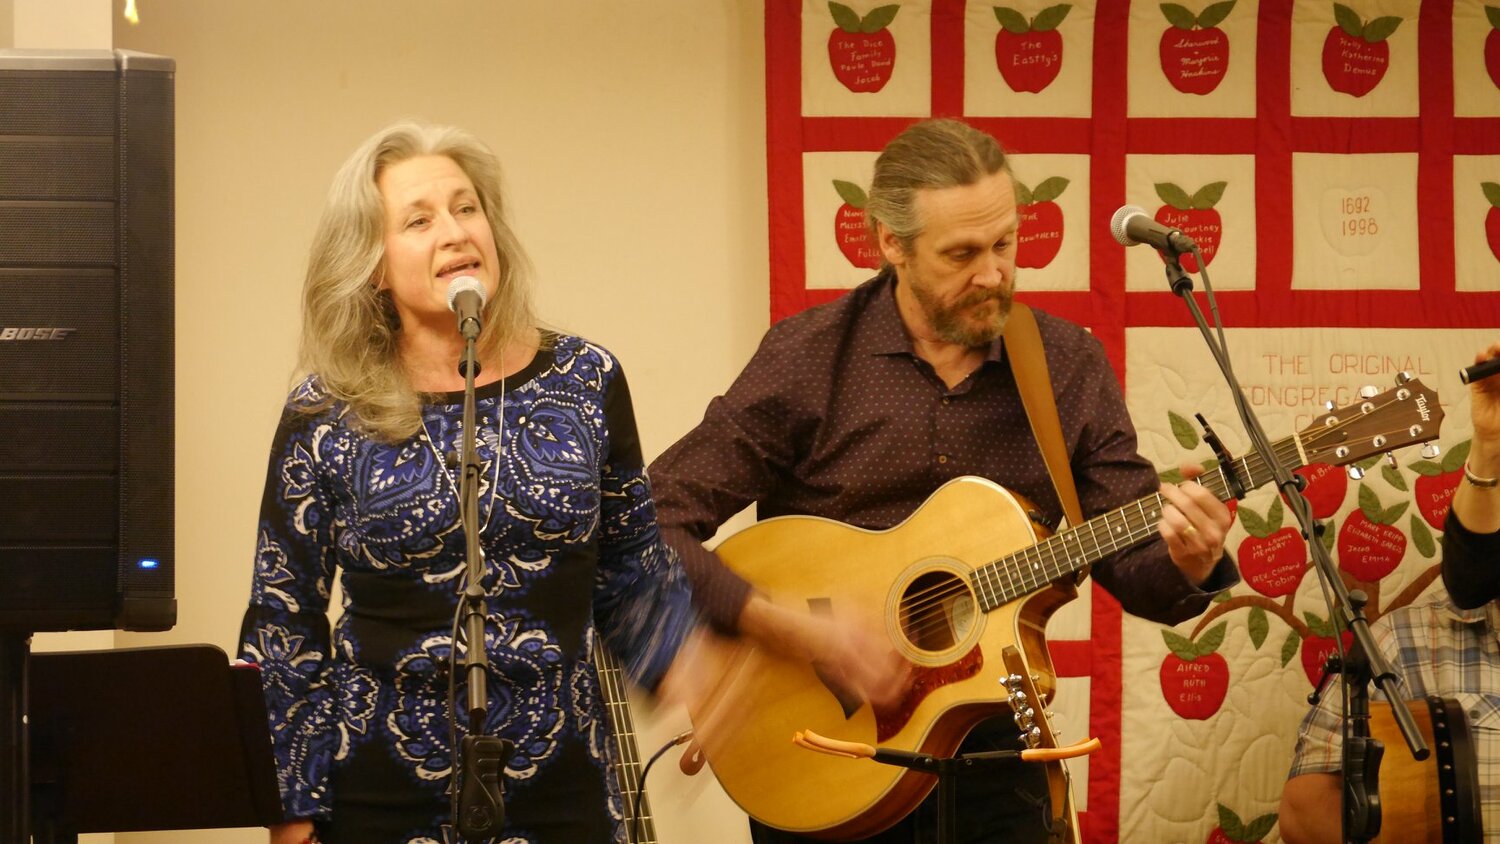 Diane and Chris Myers perform together in numerous musical acts, including their church choir, a Celtic band, a fife and drum corps, and as their own folk duo.